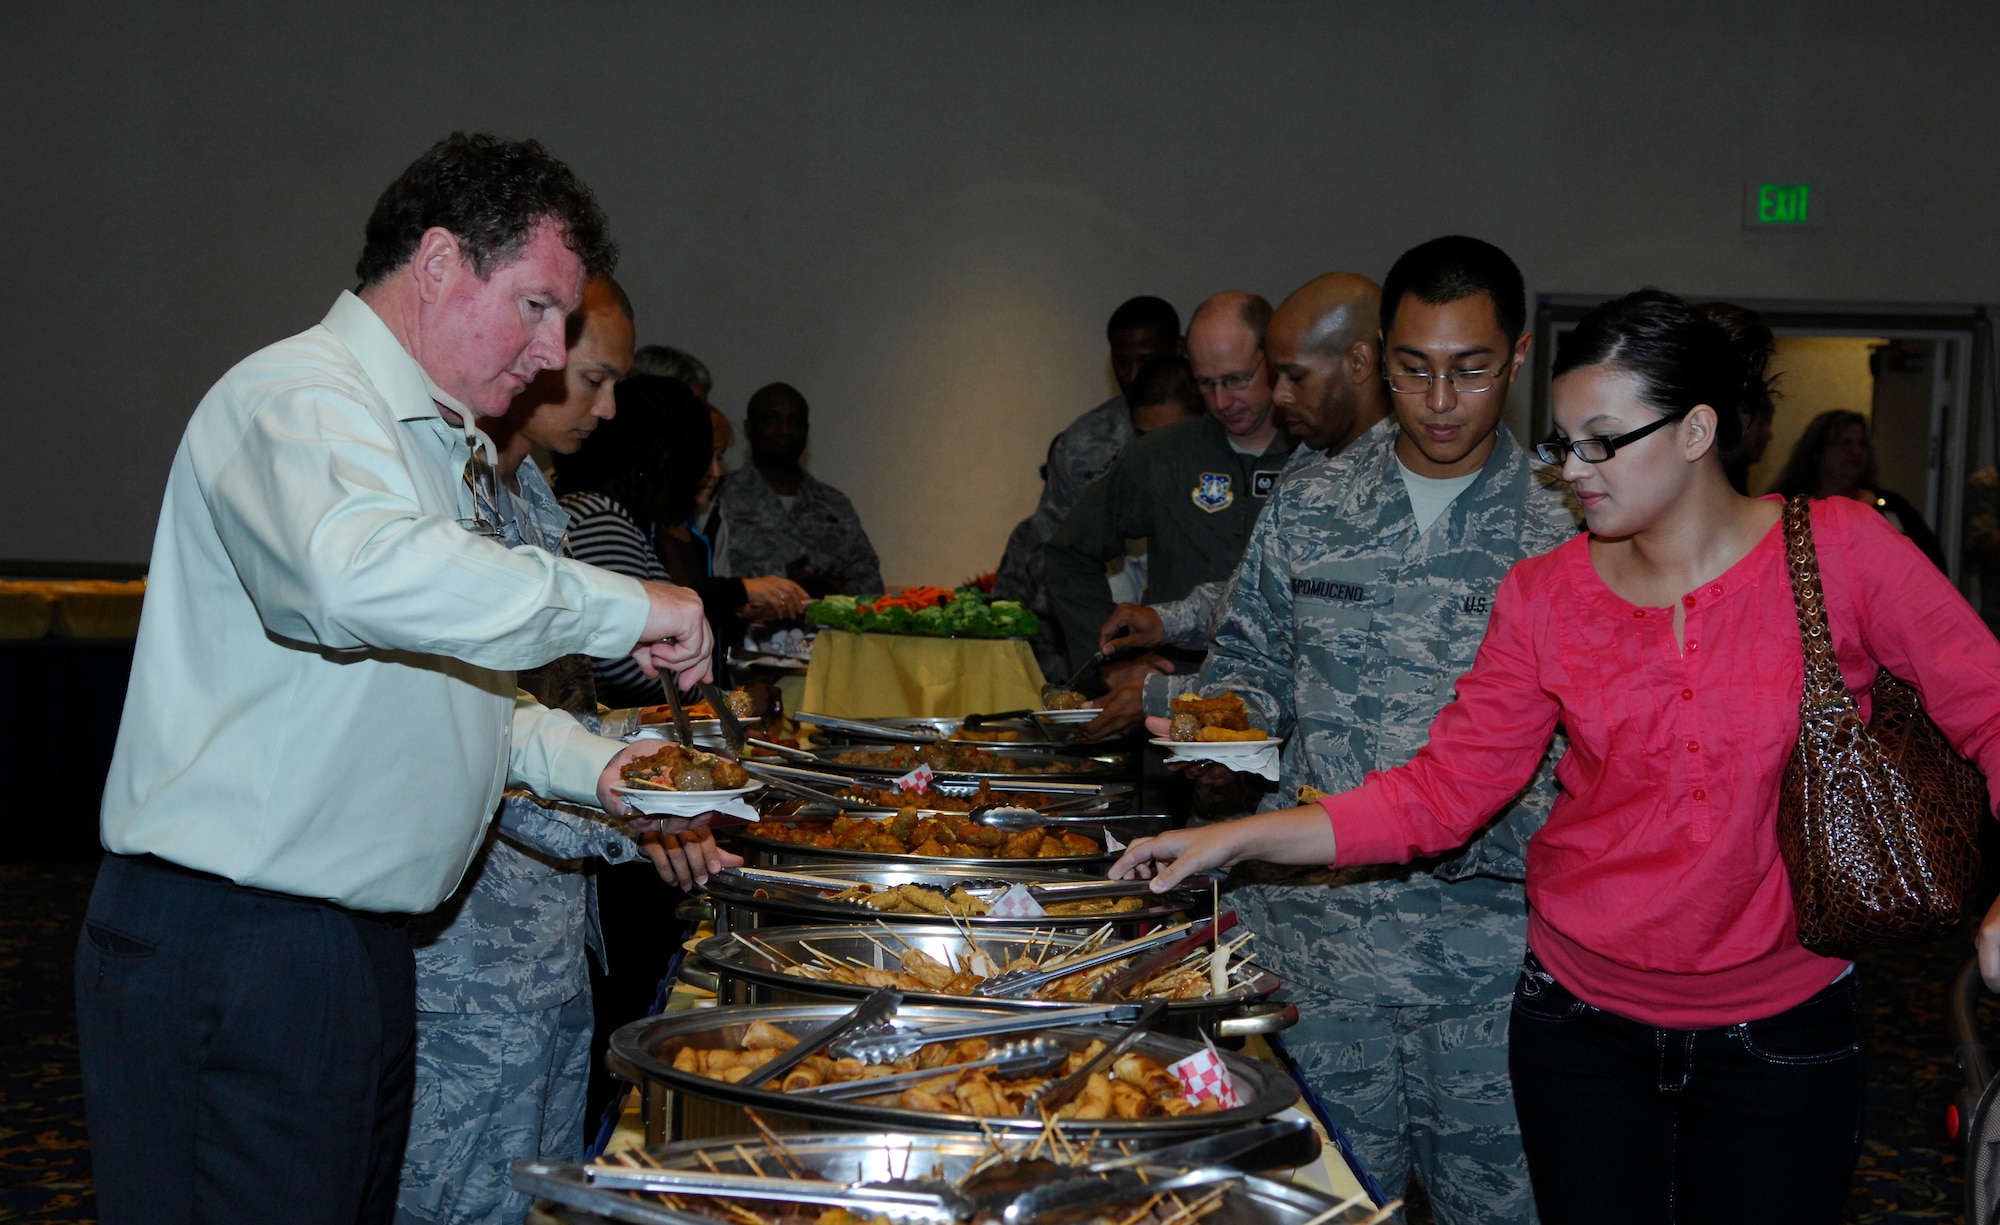 VANDENBERG AIR FORCE BASE, Calif. -- Taking advantage of the opportunity to try foods that they might not eat otherwise, Team V members venture through the buffet line of foods from different areas of the world during Cultural Heritage Day here Aug 20. The event, sponsored by the Vandenberg Equal Opportunity Office, highlighted the diversity of the Air Force. (U.S. Air Force photo/Airman 1st Class Heather R. Shaw)